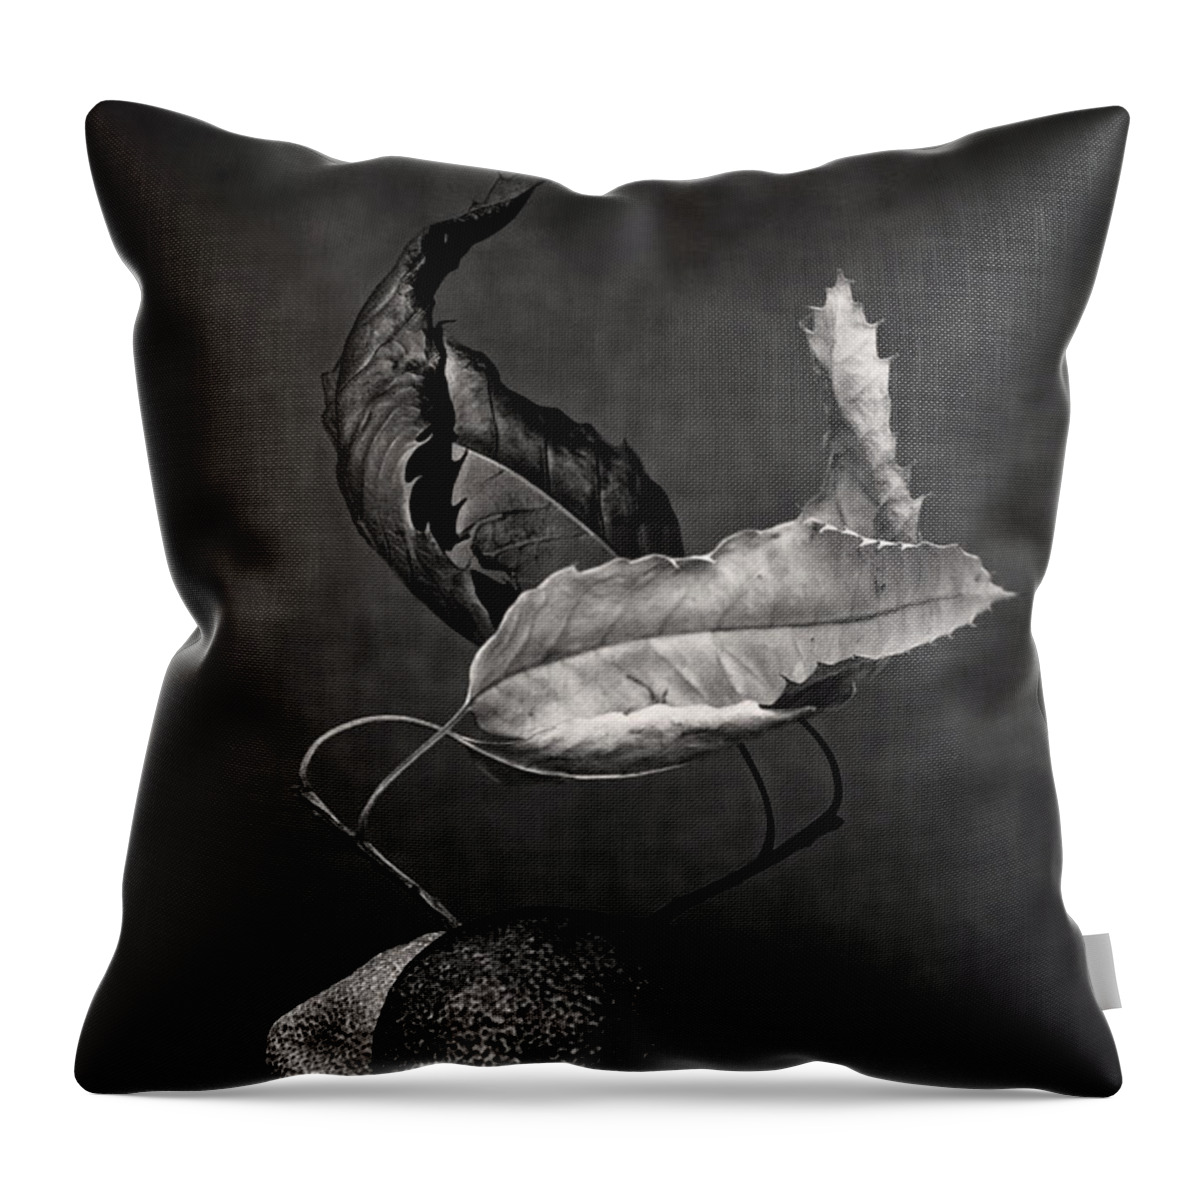 Black And White Throw Pillow featuring the photograph El Tango by Dorit Fuhg